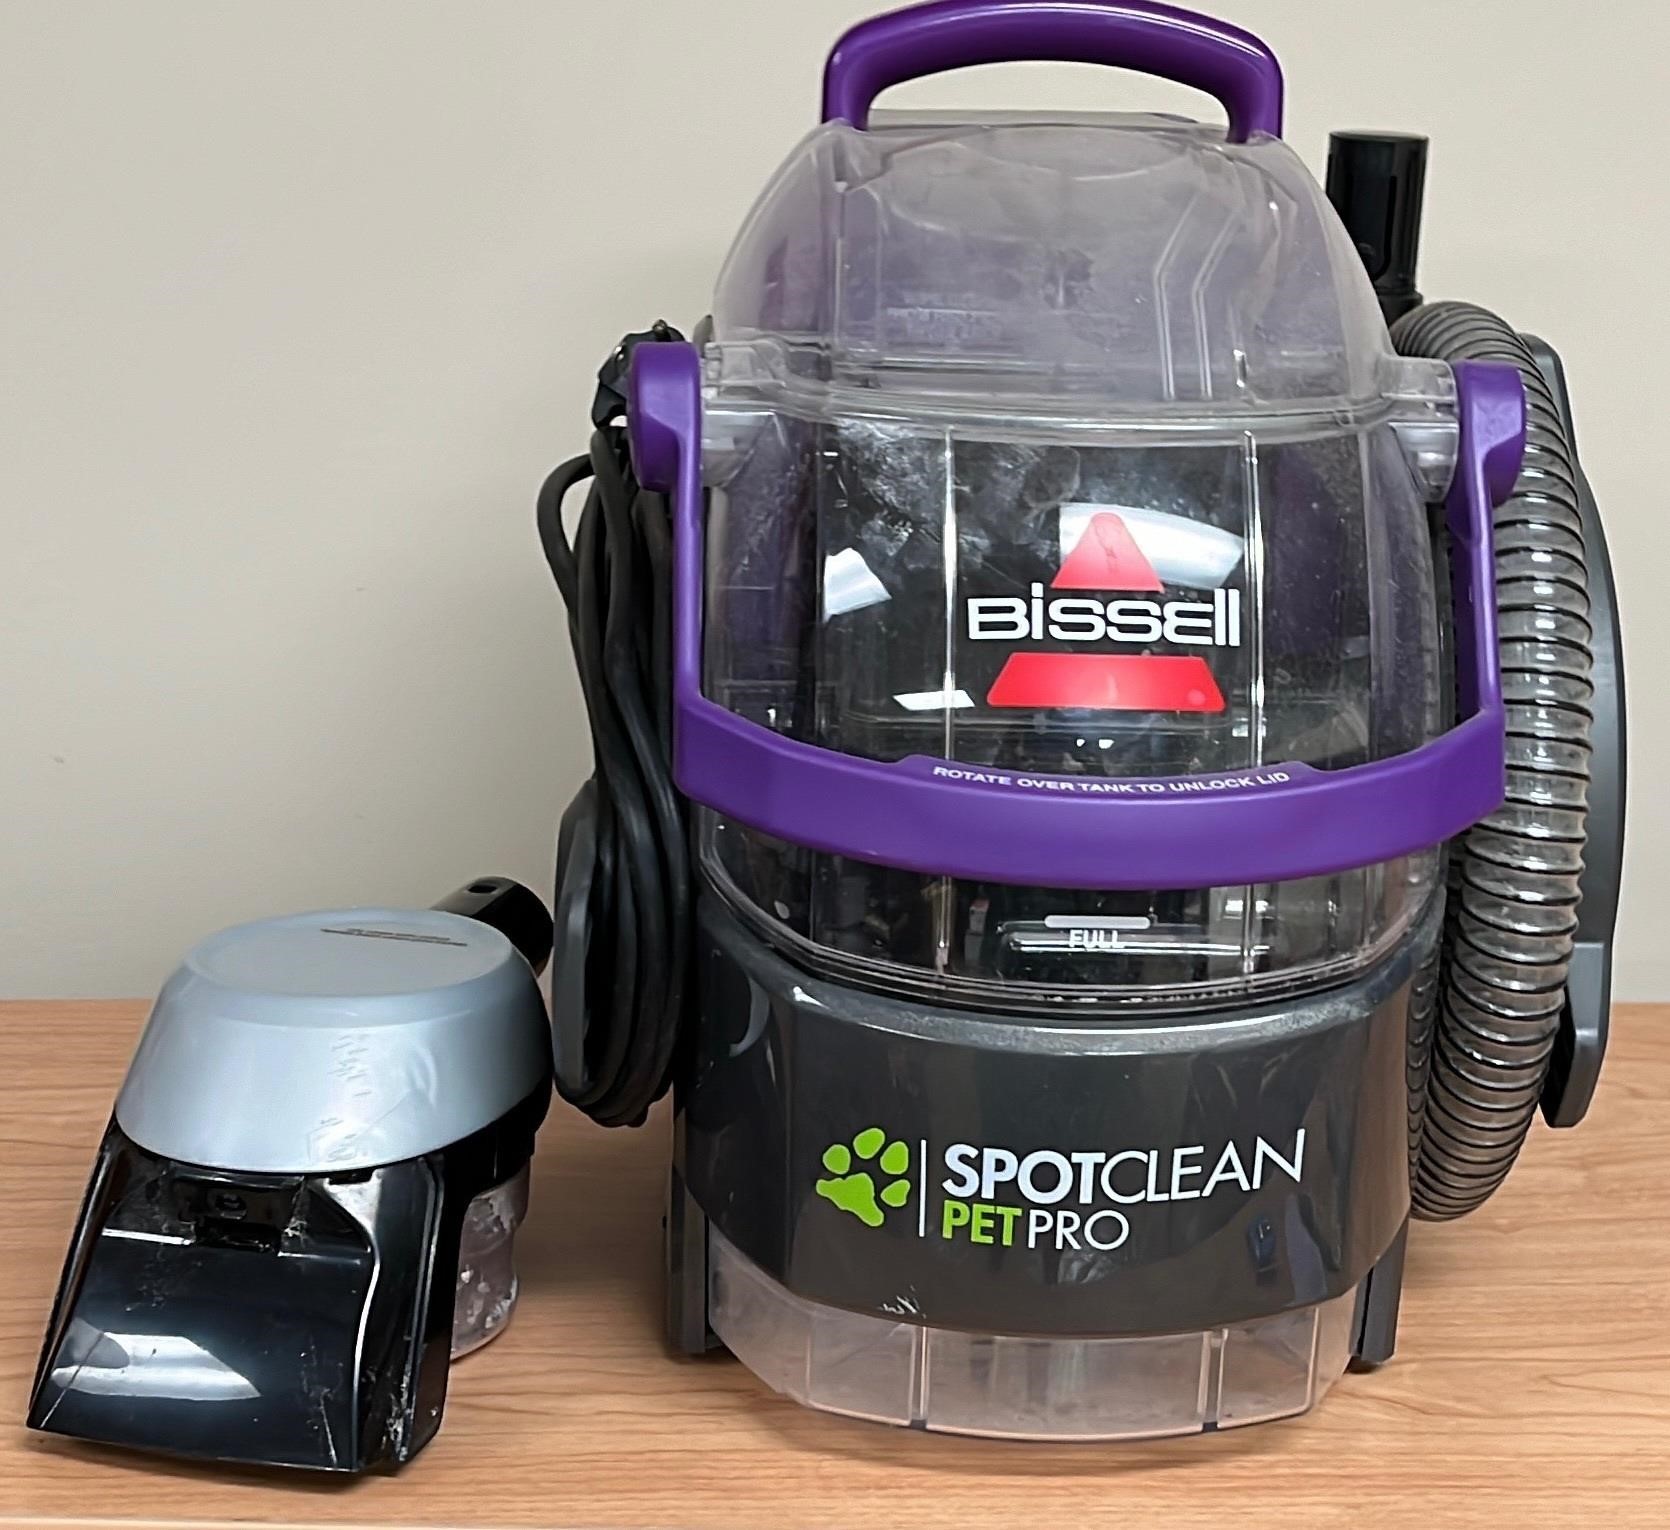 BISSELL SPOTCLEAN PETPRO CLEANER